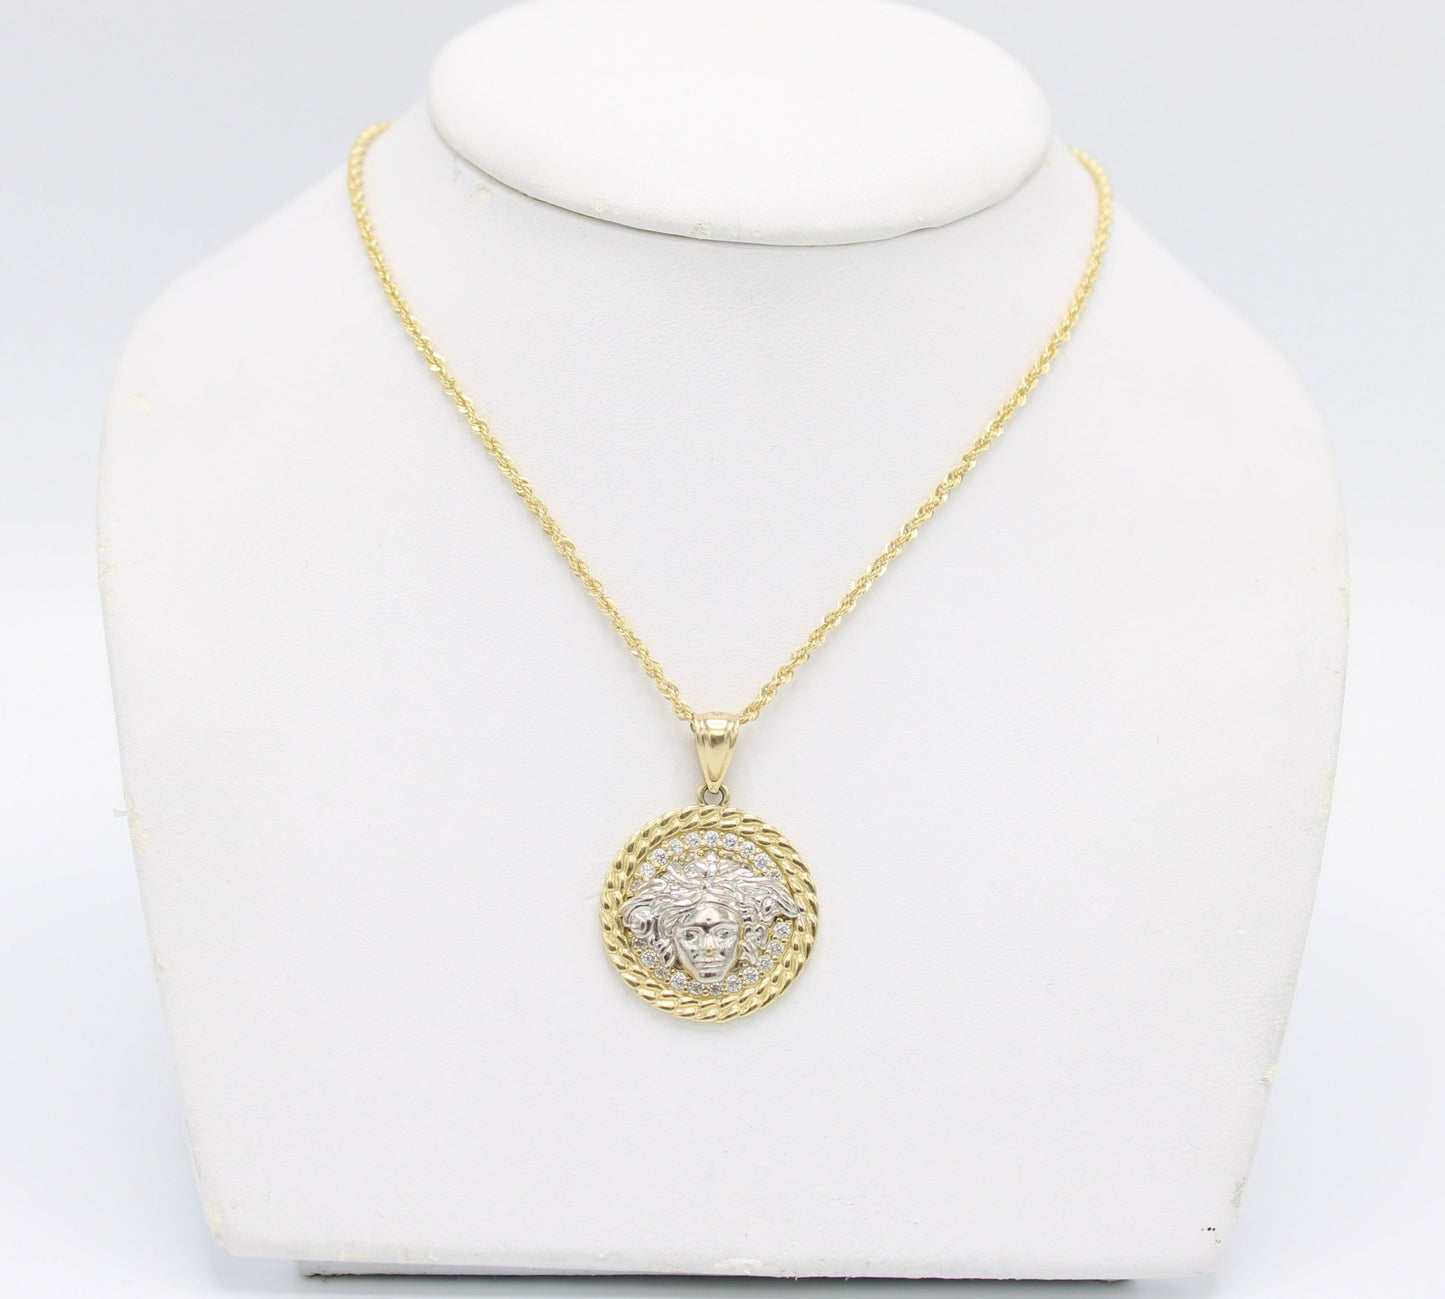 14k Medusa Pendant Cz Stones with Rope Chain Yellow Gold